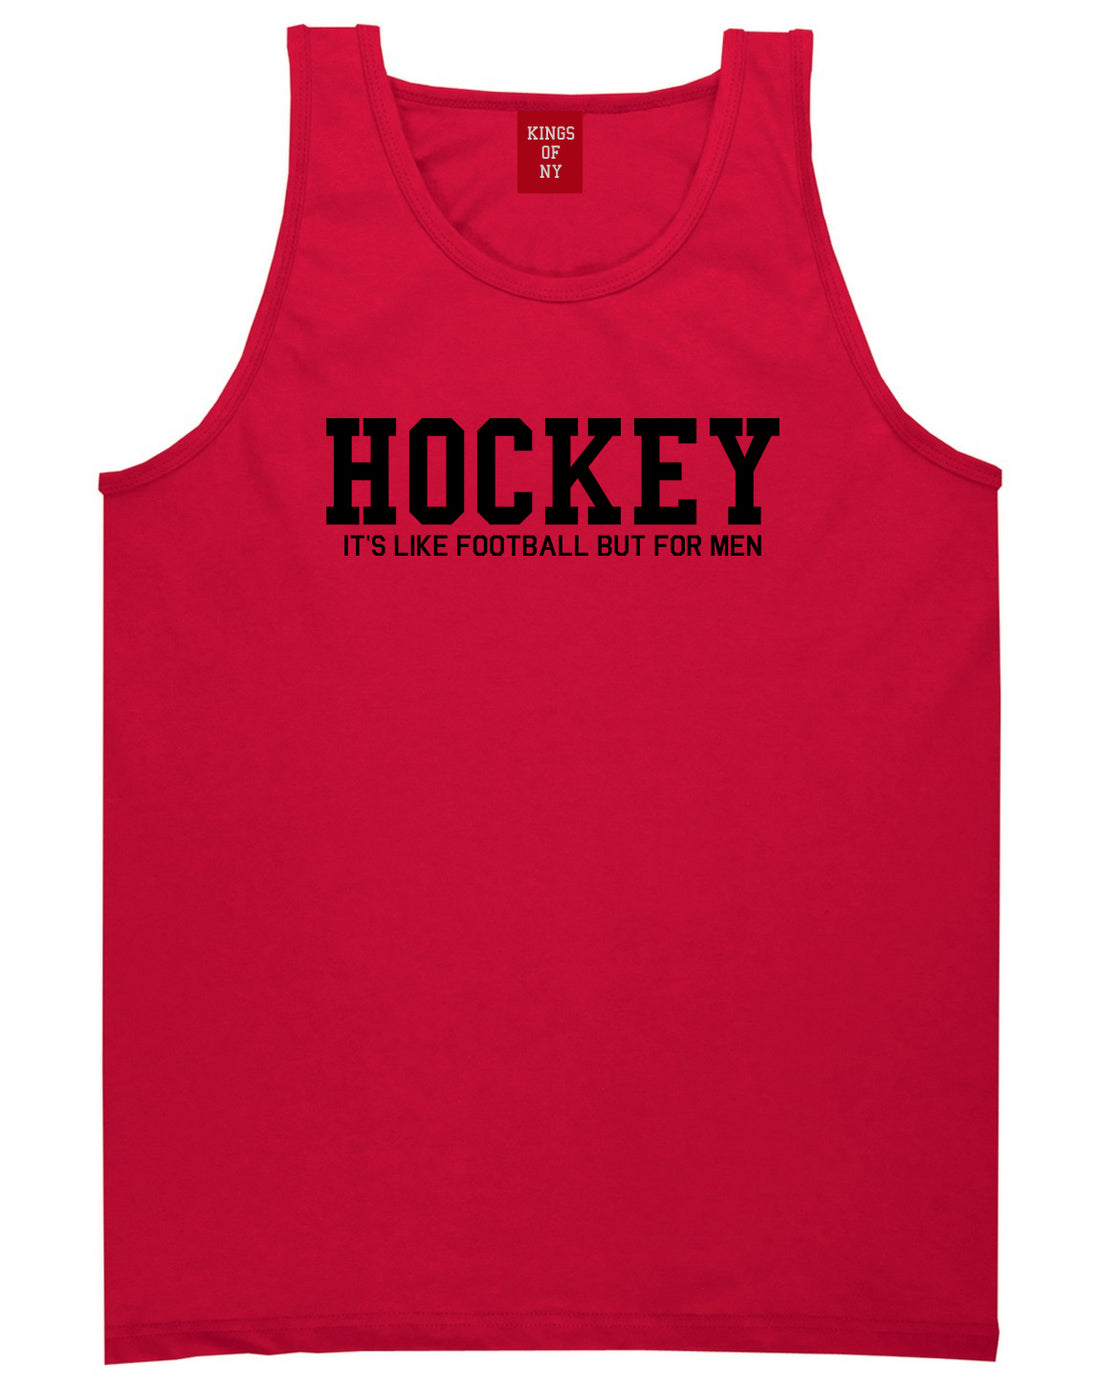 Hockey Its Like Football But For Men Funny Mens Tank Top T-Shirt Red